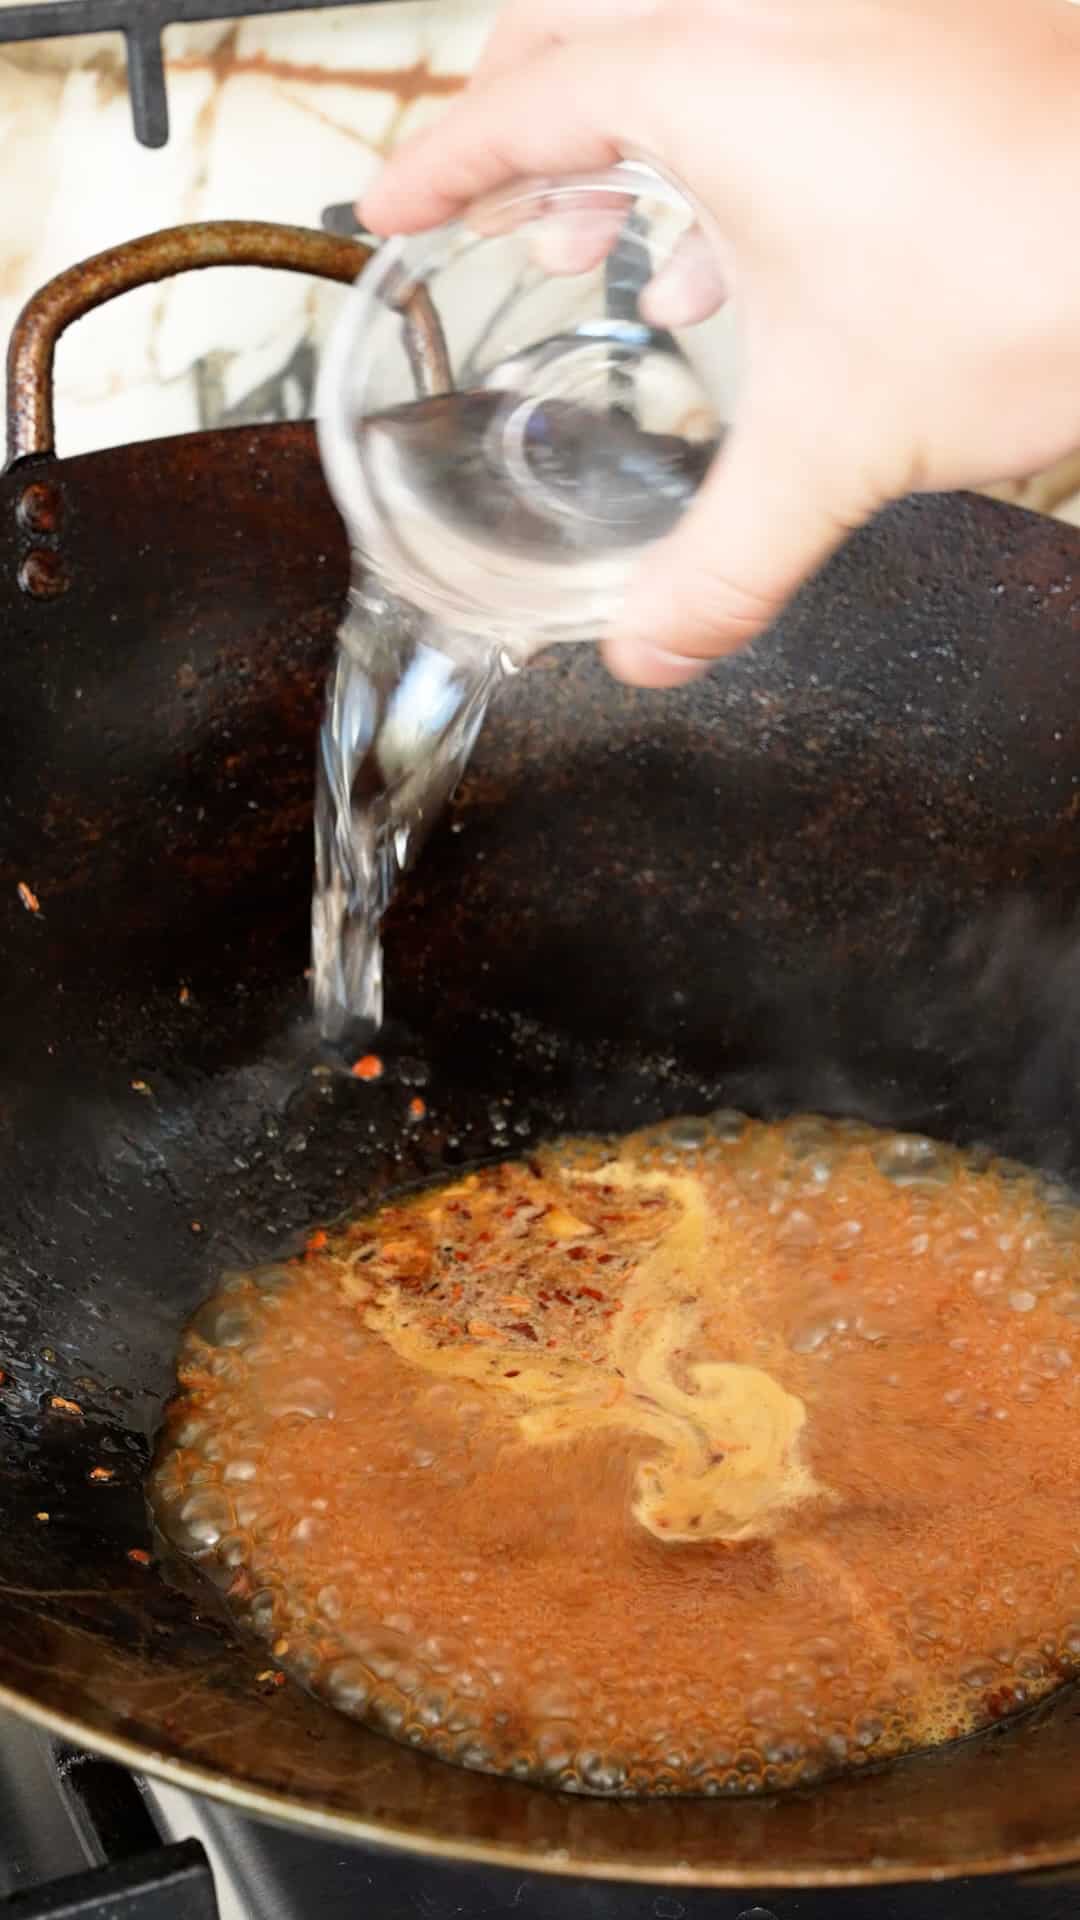 White vinegar being added to the General Tso's Sauce in a wok.